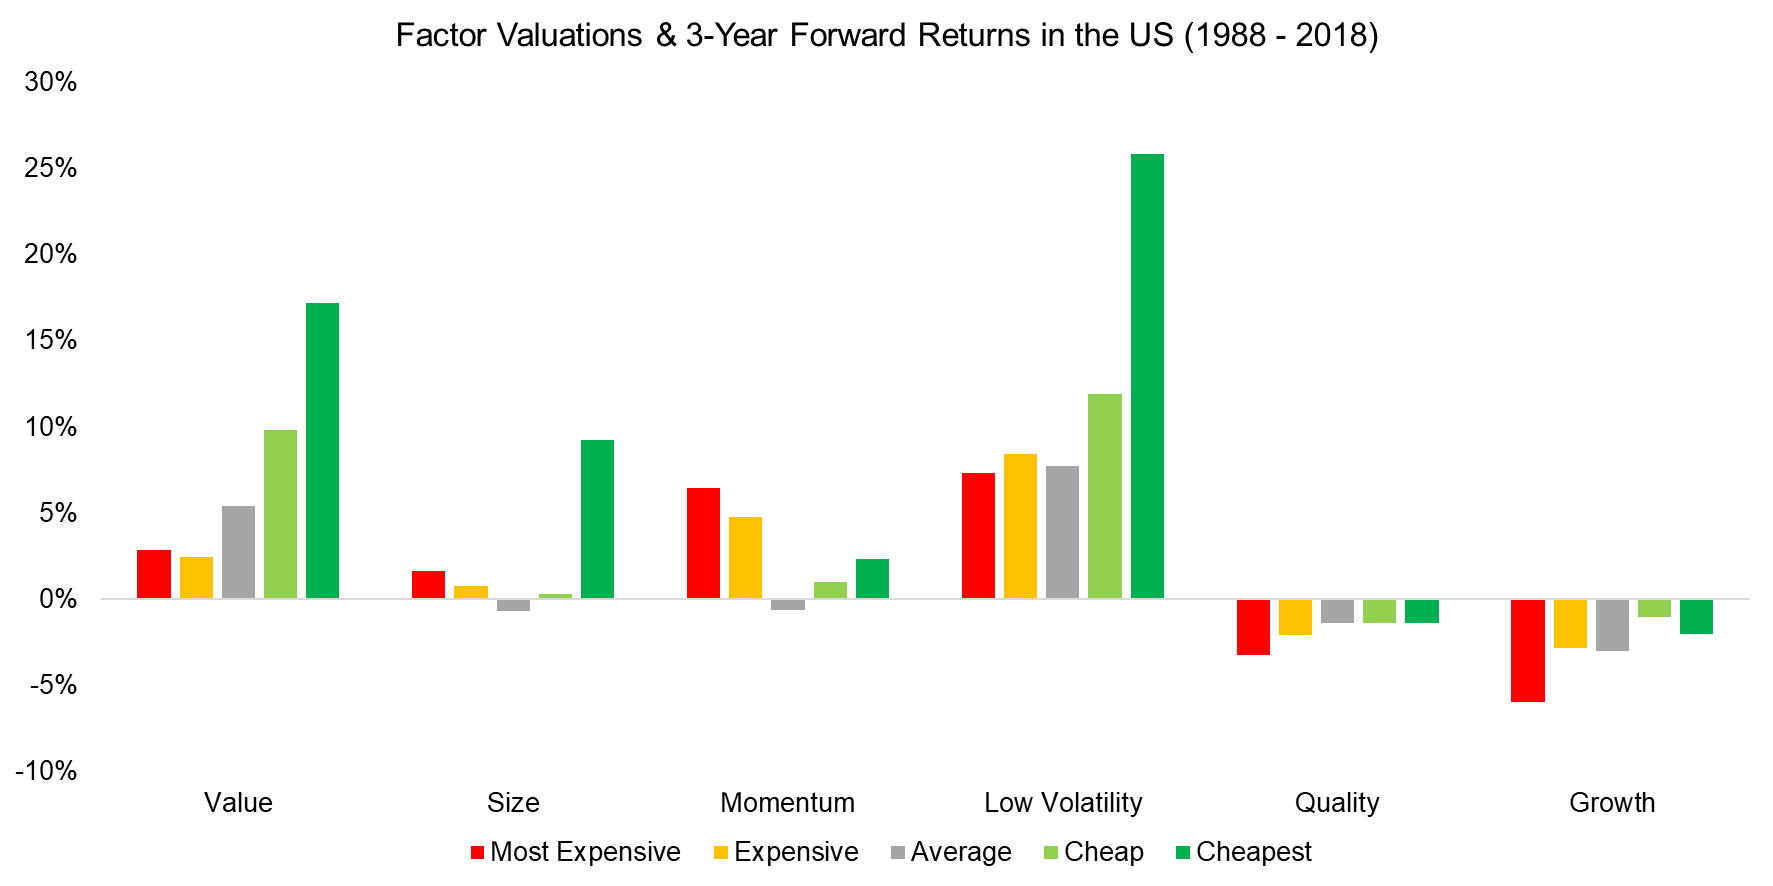 Factor Valuations & 3-Year Forward Returns in the US (1988 - 2018)